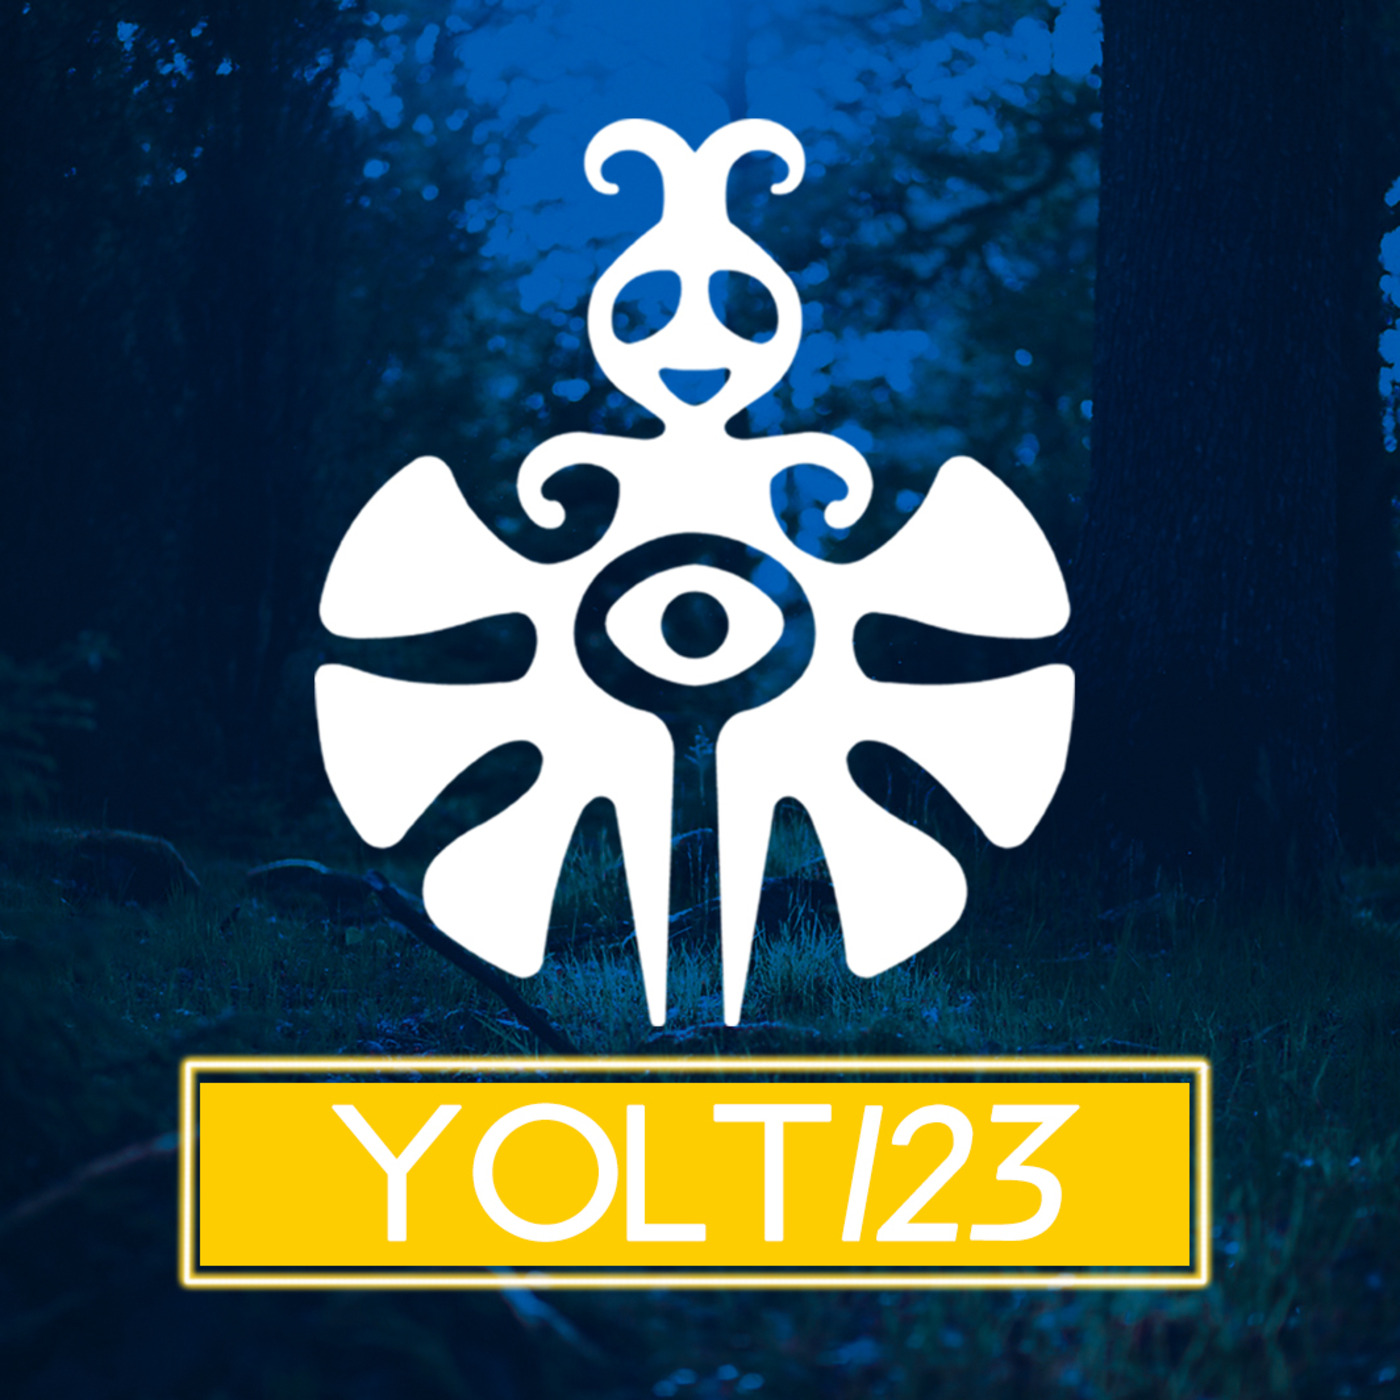 You Only Live Trance Episode 123 (#YOLT123) - Ness